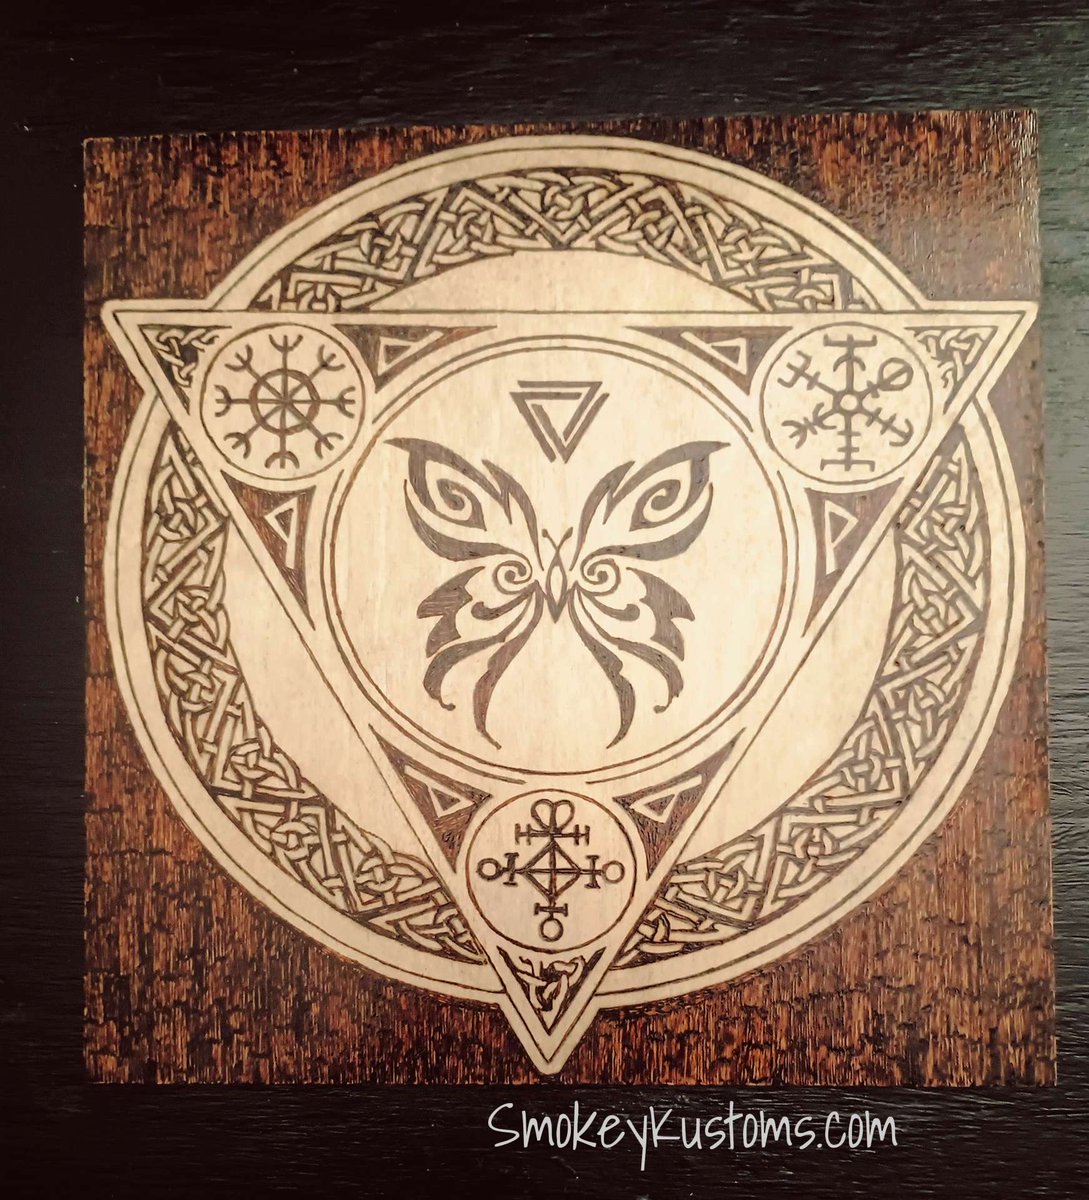 🔥 Check out my stunning 12x12 hand wood-burned Viking-inspired art, featuring a mesmerizing butterfly centerpiece. Elevate your decor with this unique piece. Available now at smokekustoms.com
🦋 #VikingArt #WoodburningArt #SmokeKustoms